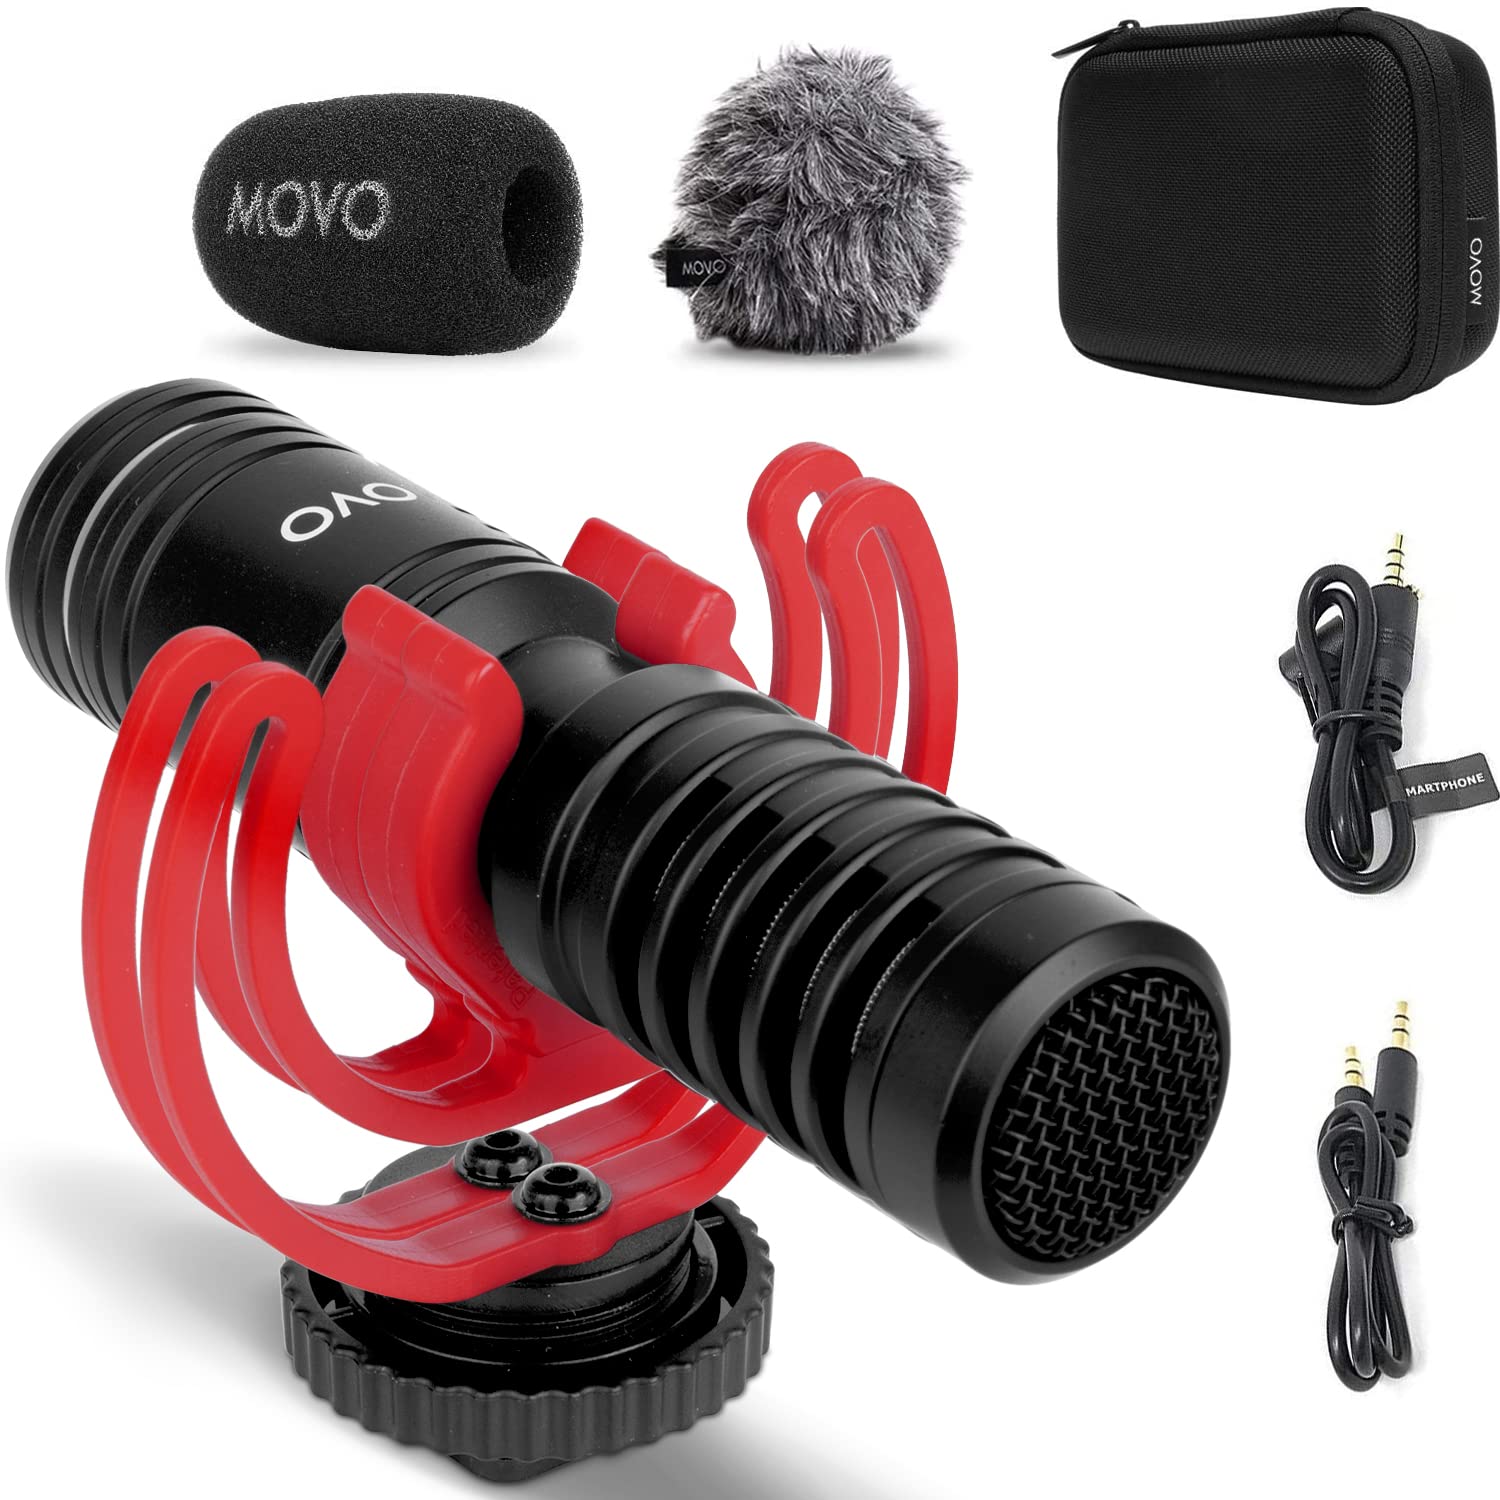 Movo VXR10-PRO External Video Microphone for Camera with Rycote Lyre Shock Mount - Battery-Free ,Compact Shotgun Mic Compatible with DSLR Cameras and iPhone, Android Smartphones  - Acceptable